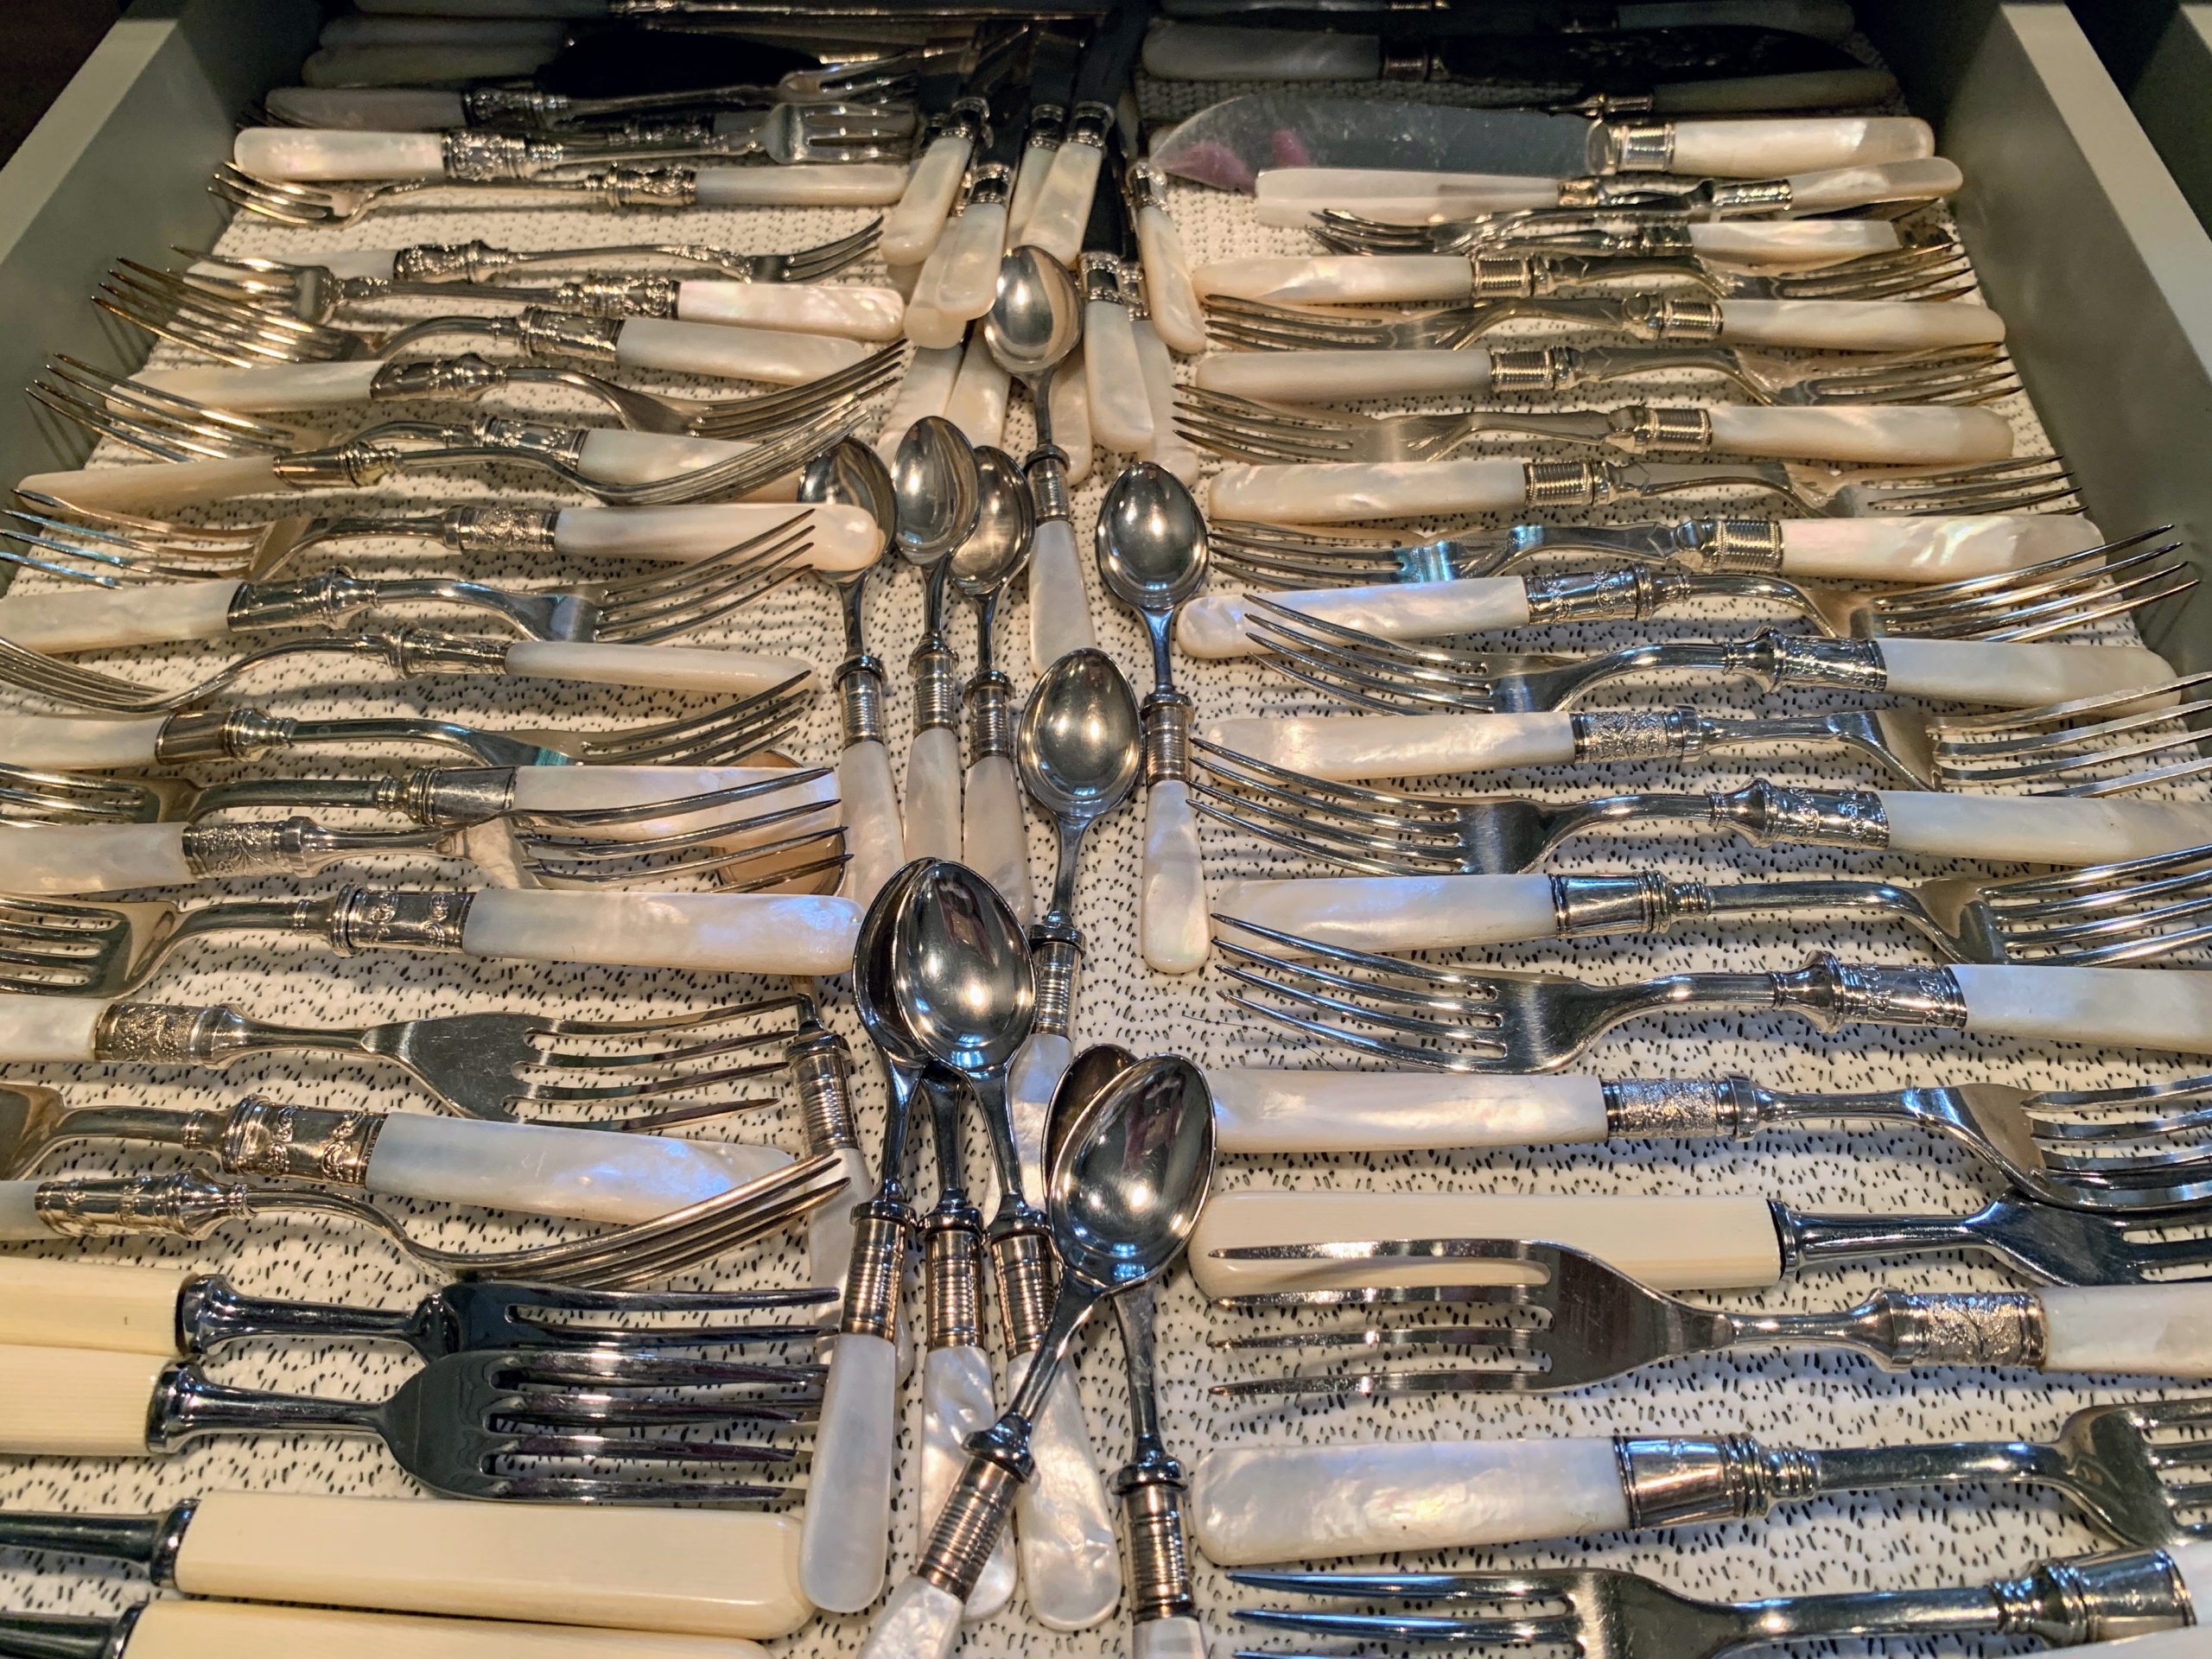 How to Care for Antique & Vintage Silver Flatware